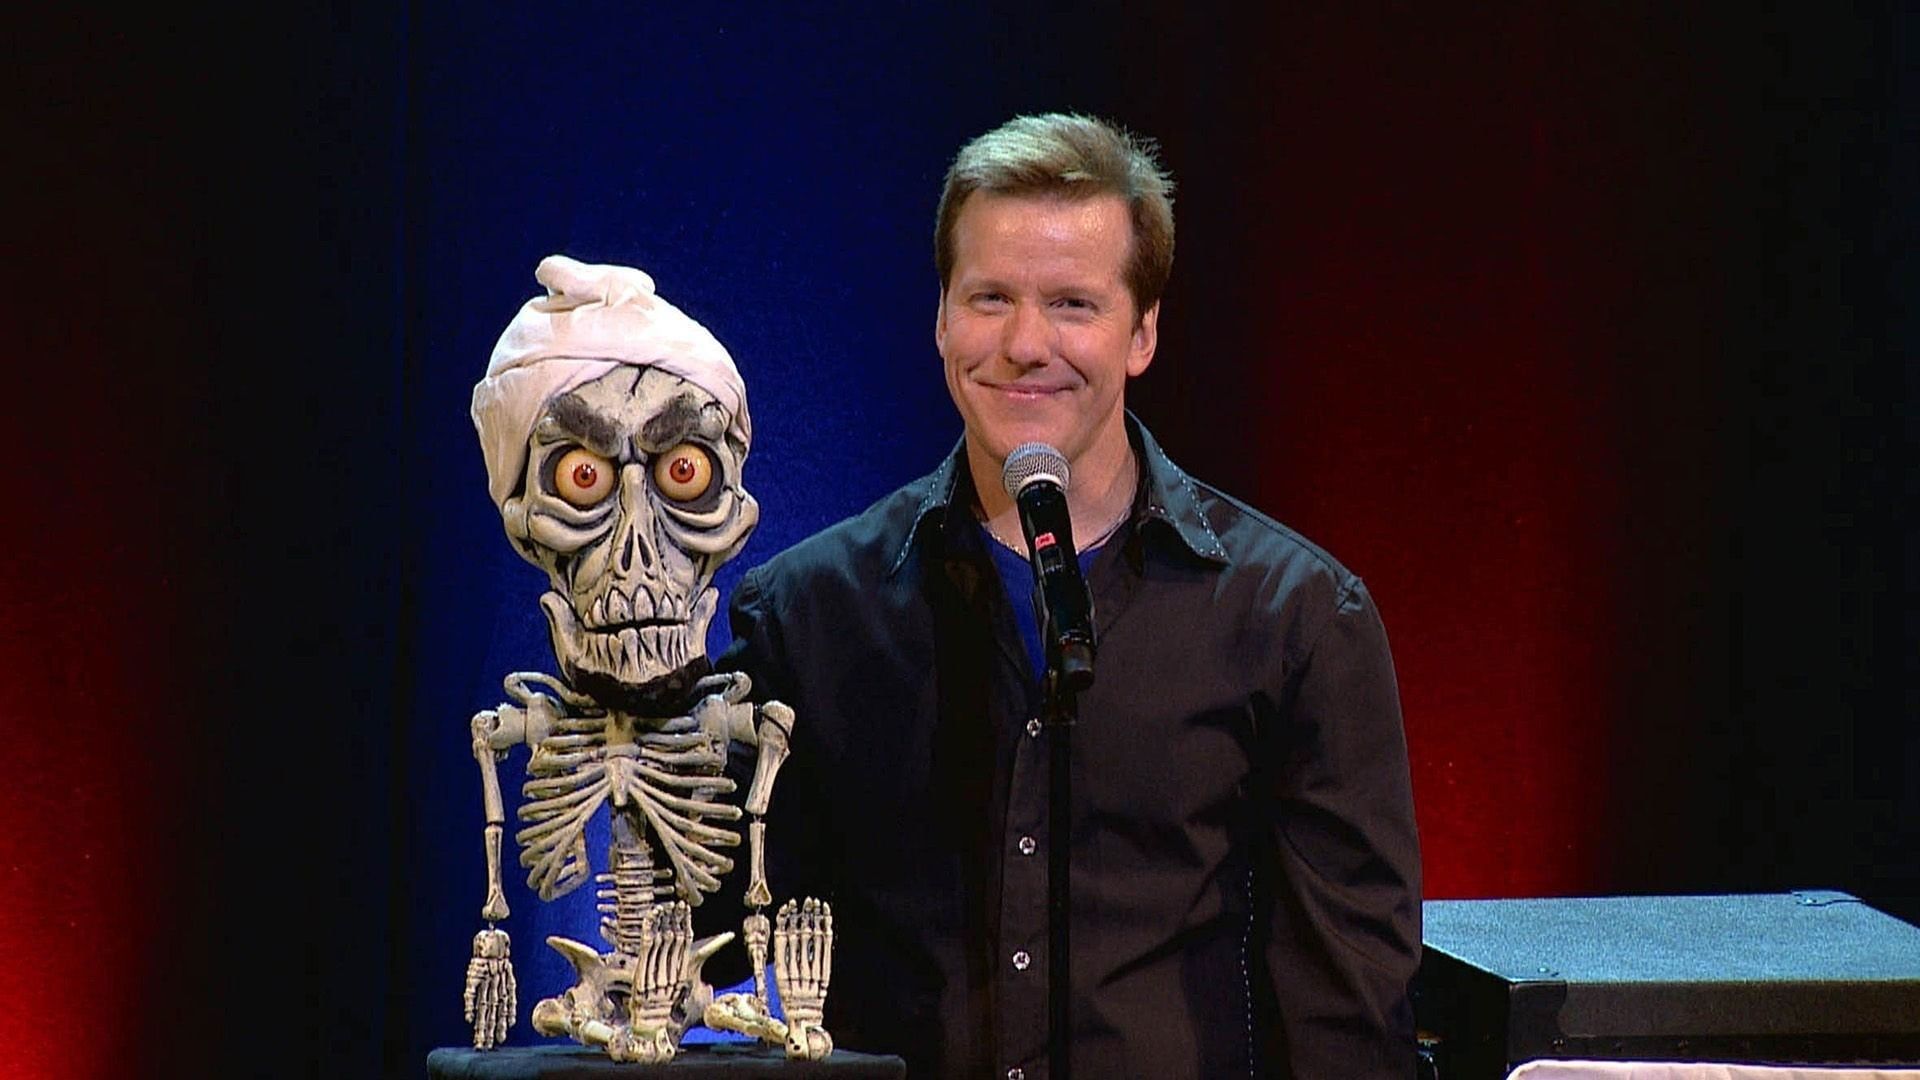 Jeff Dunham: All Over the Map background